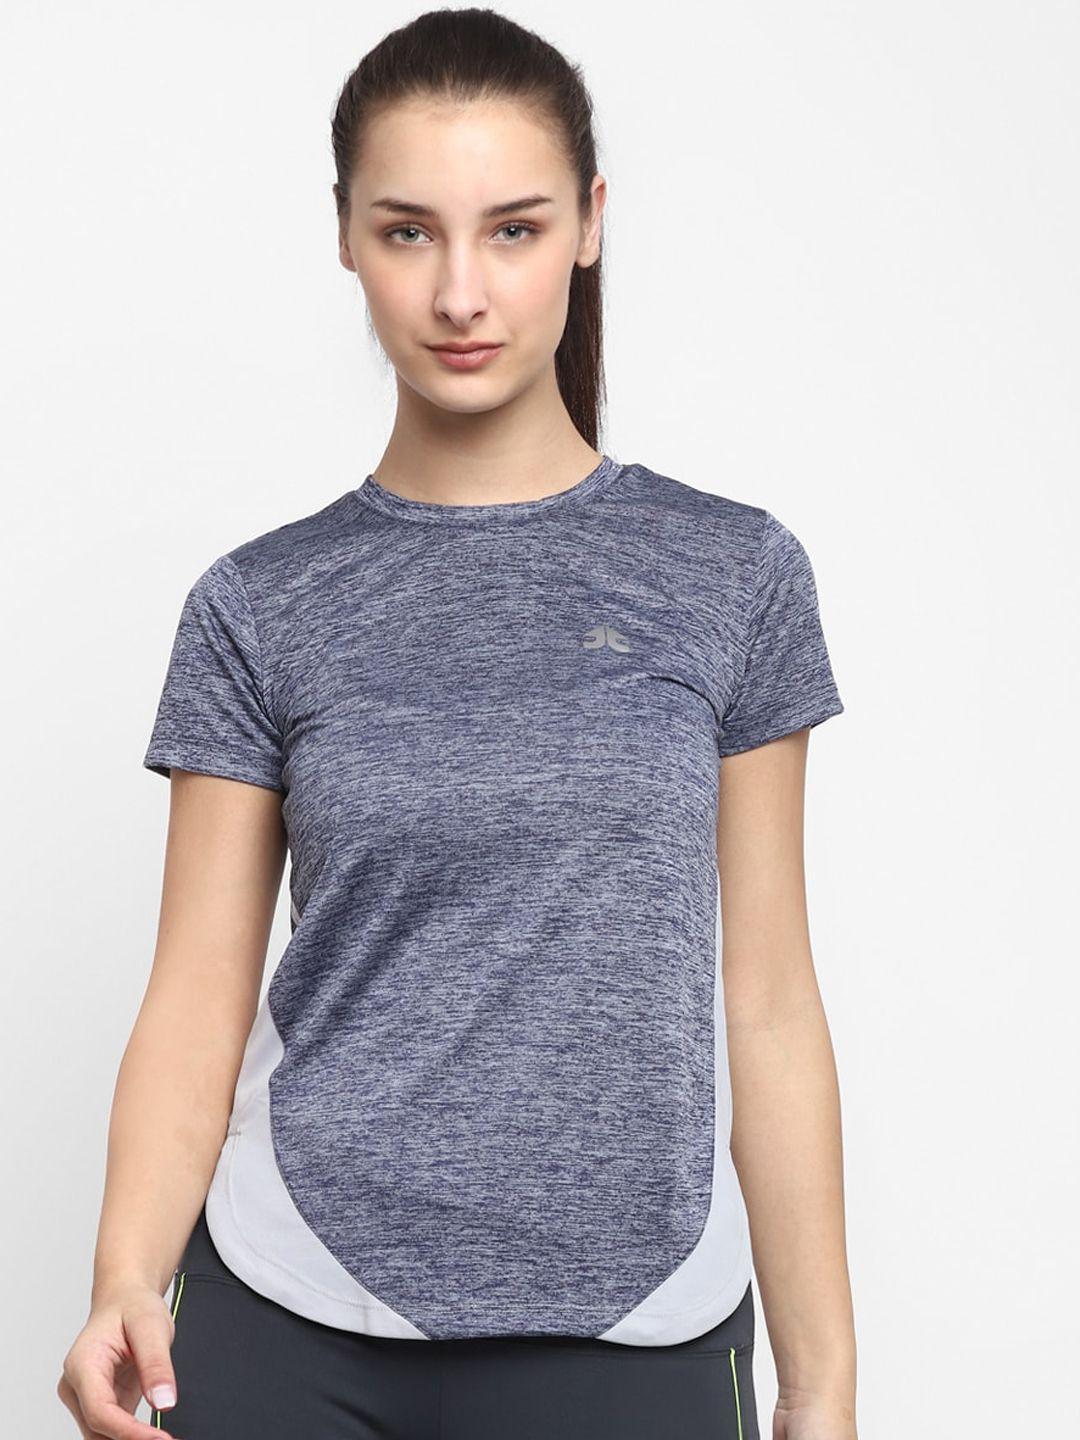 off-limits-women-navy-blue-solid-round-neck-t-shirt